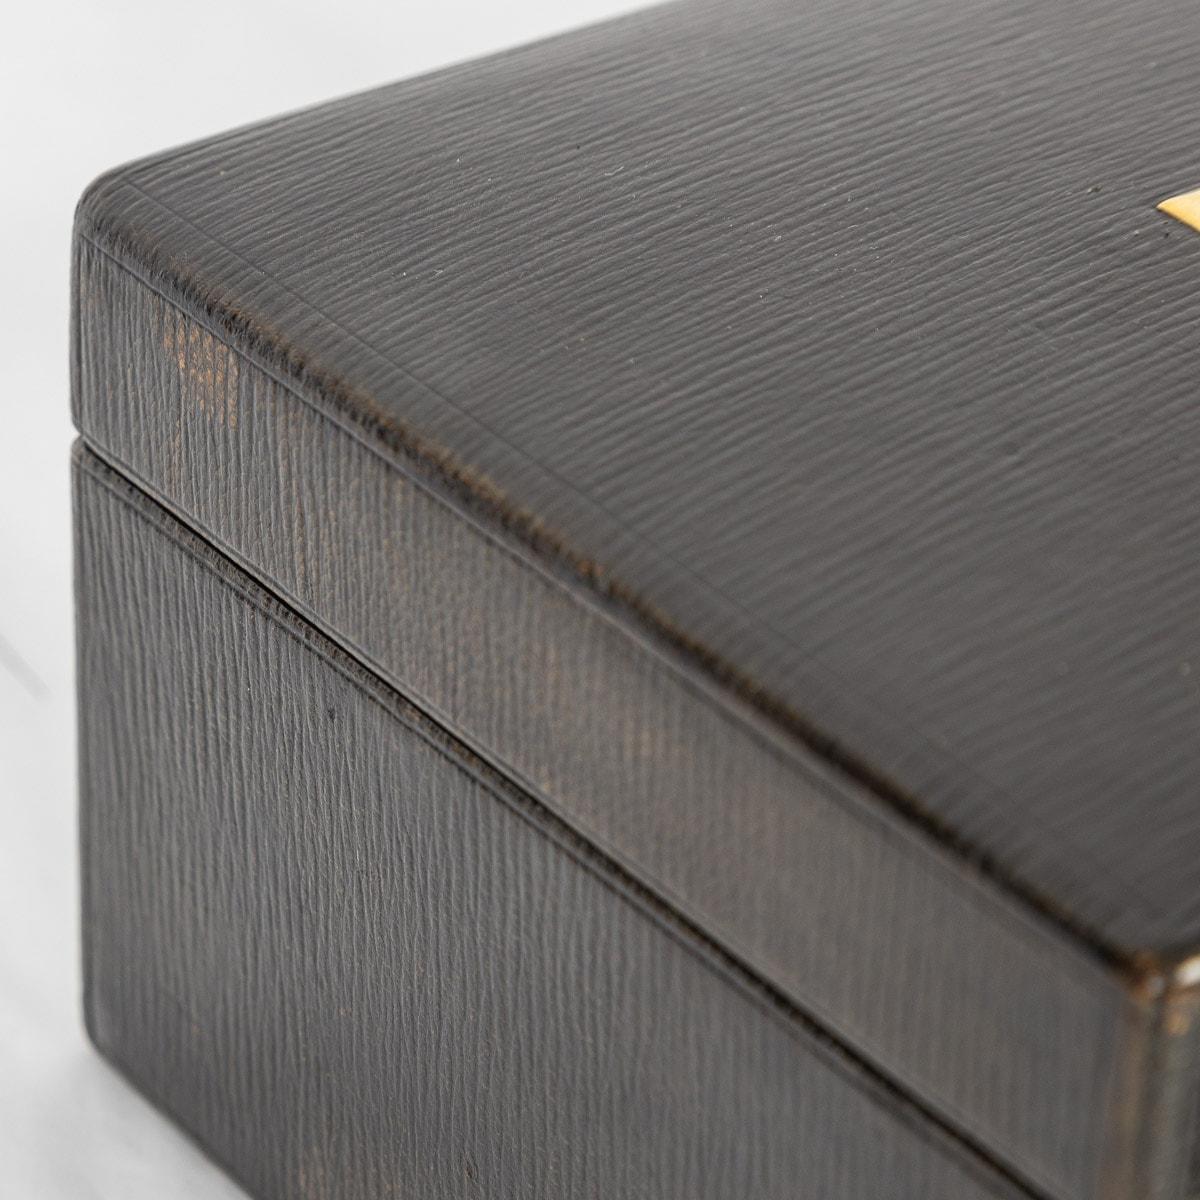 20th Century Leather Jewellery Box, c.1920 For Sale 12